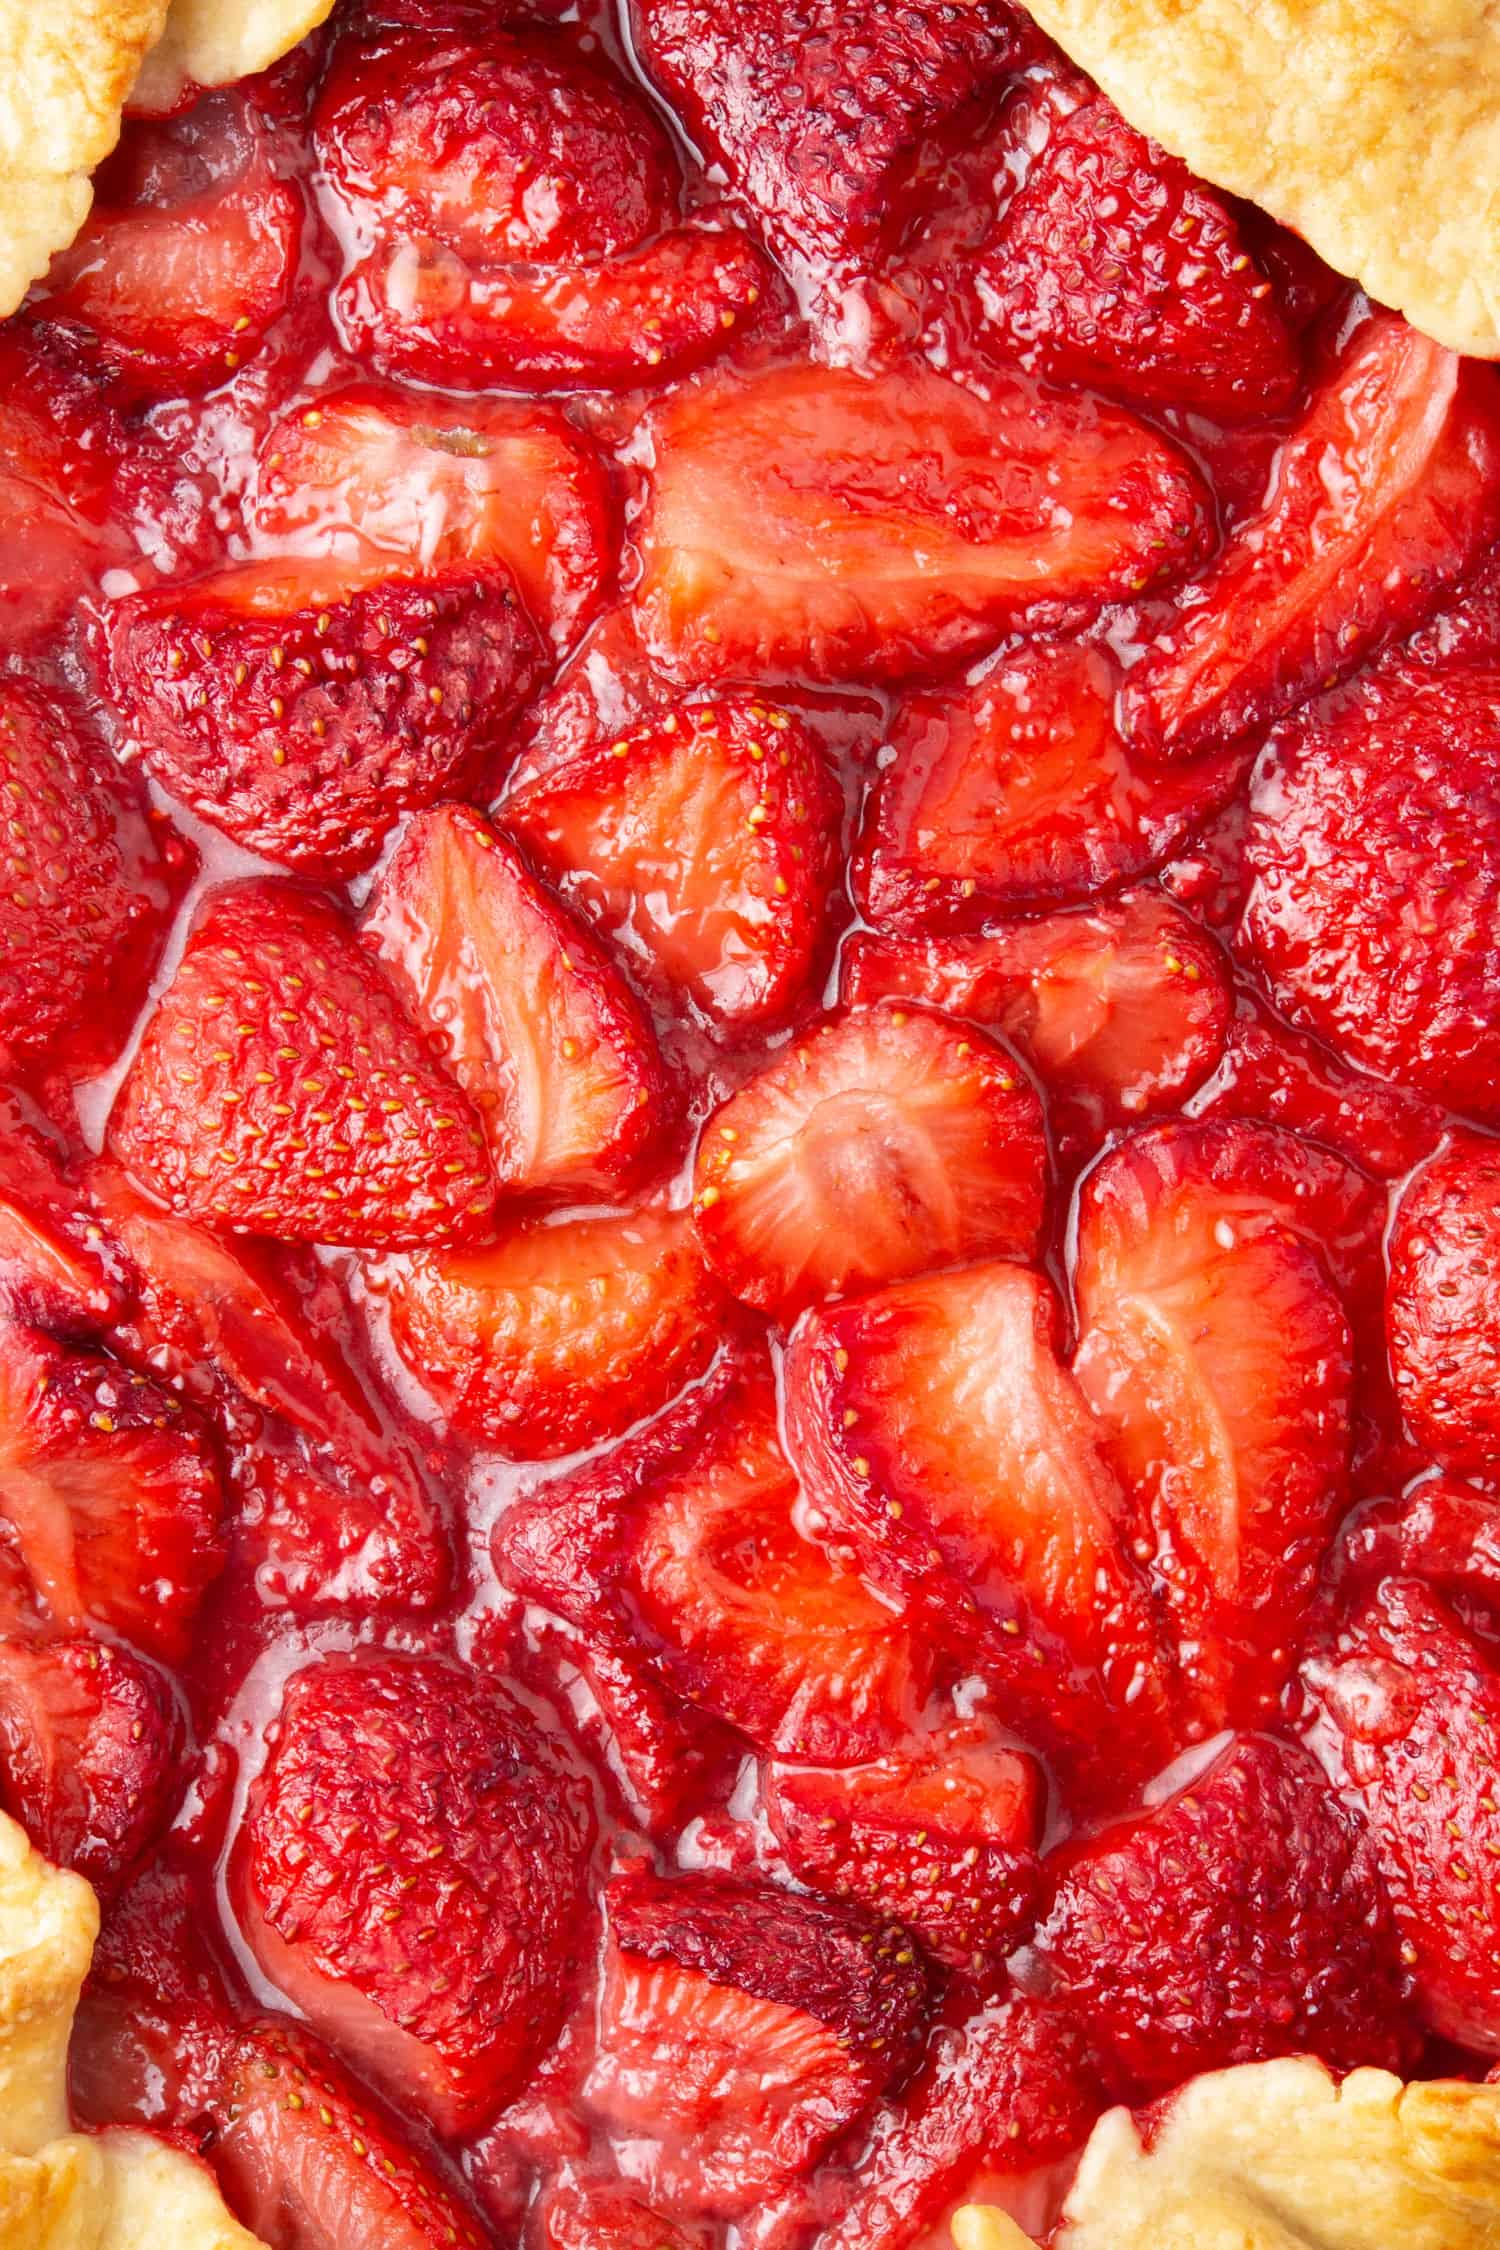 Close up image of the Strawberry filling.